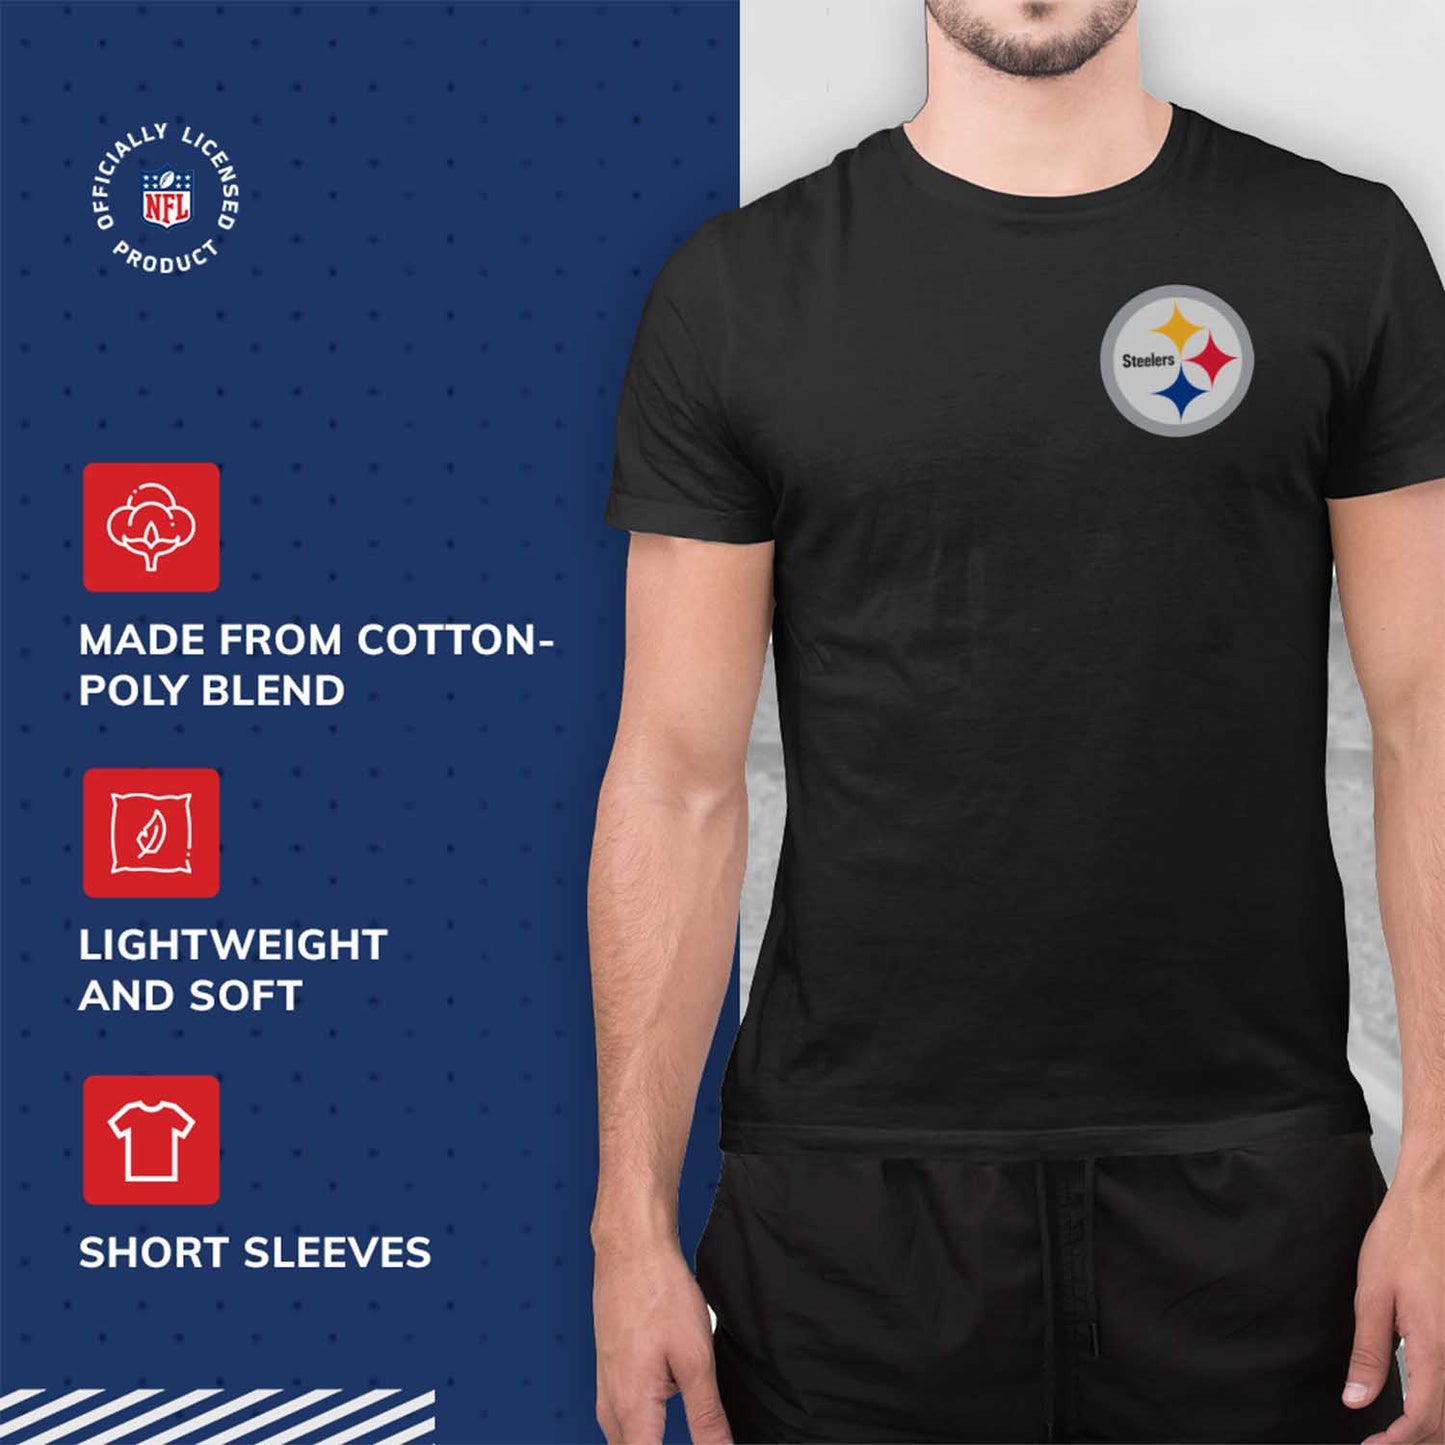 Pittsburgh Steelers NFL Pro Football Final Countdown Adult Cotton-Poly Short Sleeved T-Shirt For Men & Women - Black